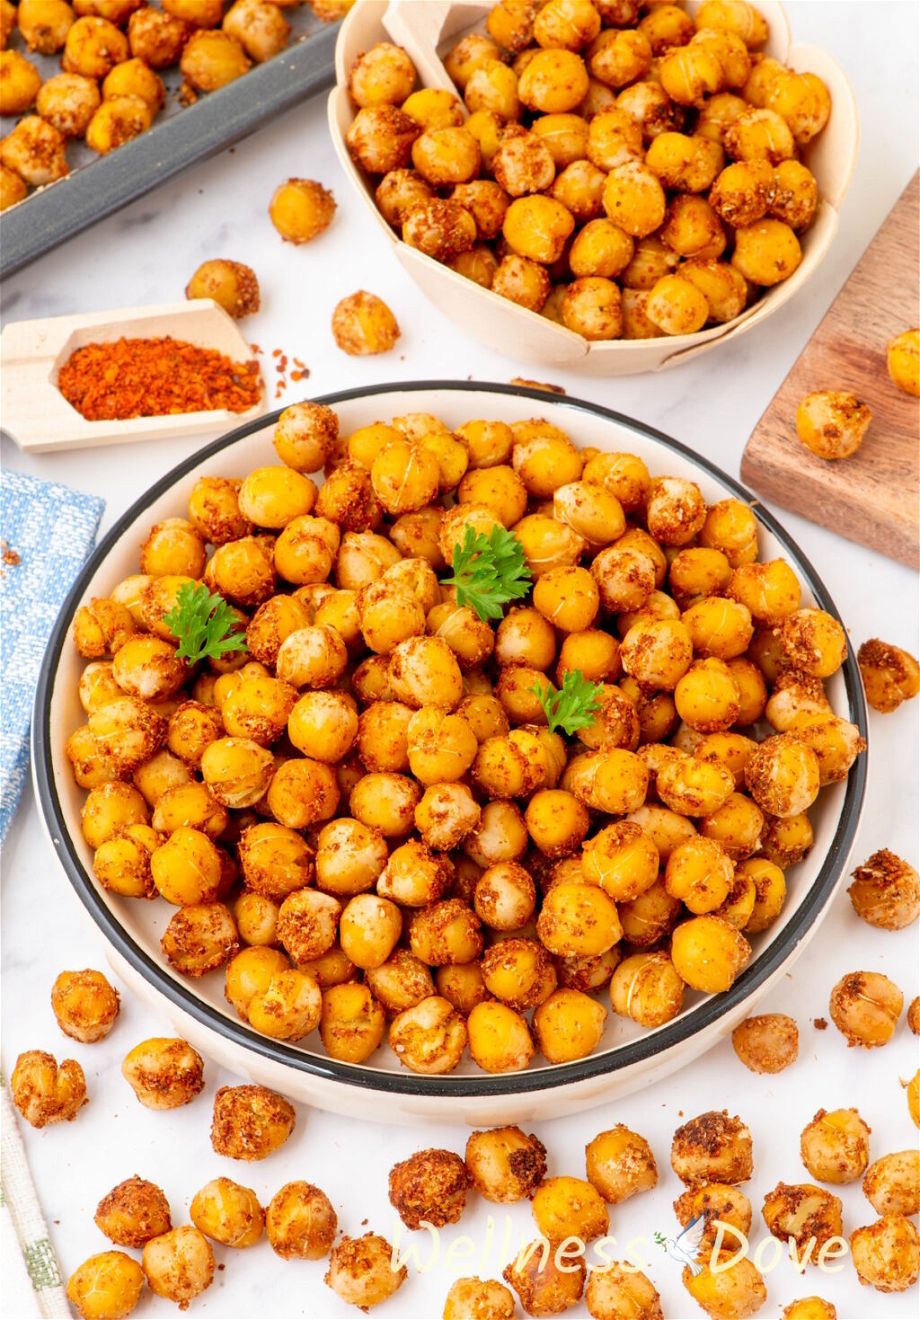 the Oil-free Oven Roasted Chickpeas in a small plate